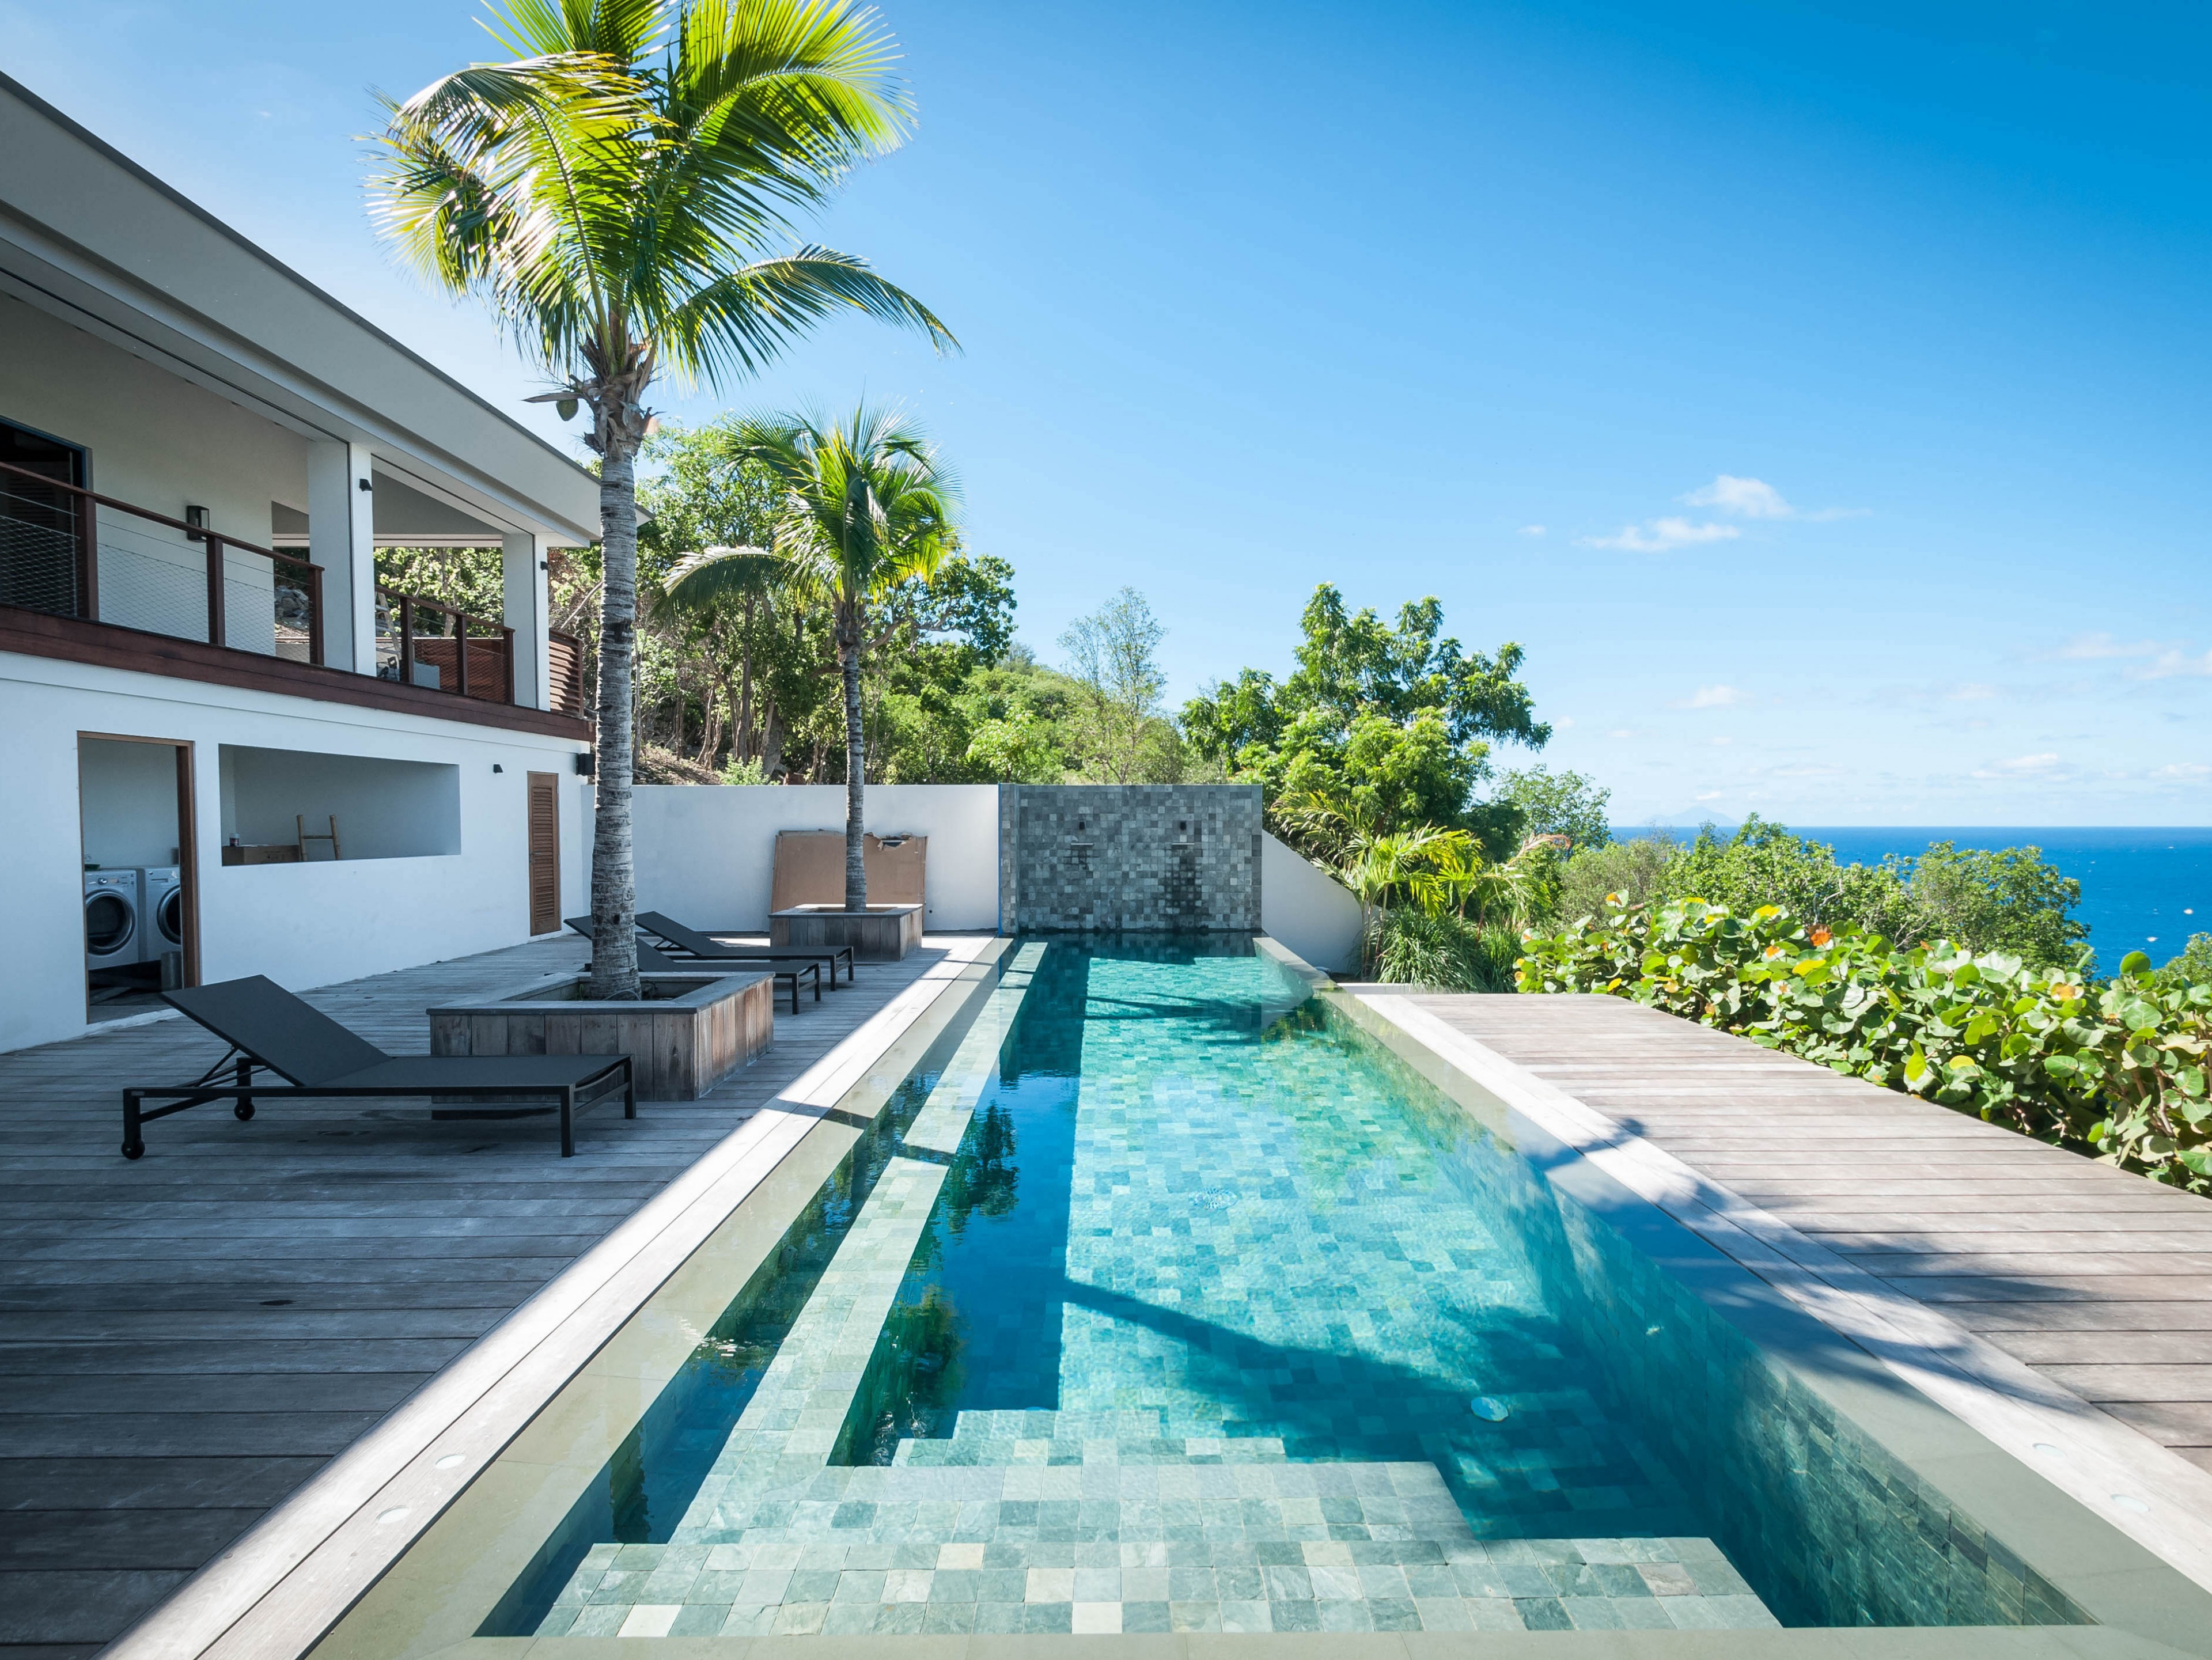 Villa Jocapana - Vacation rentals with private pools in Lurin St Barts